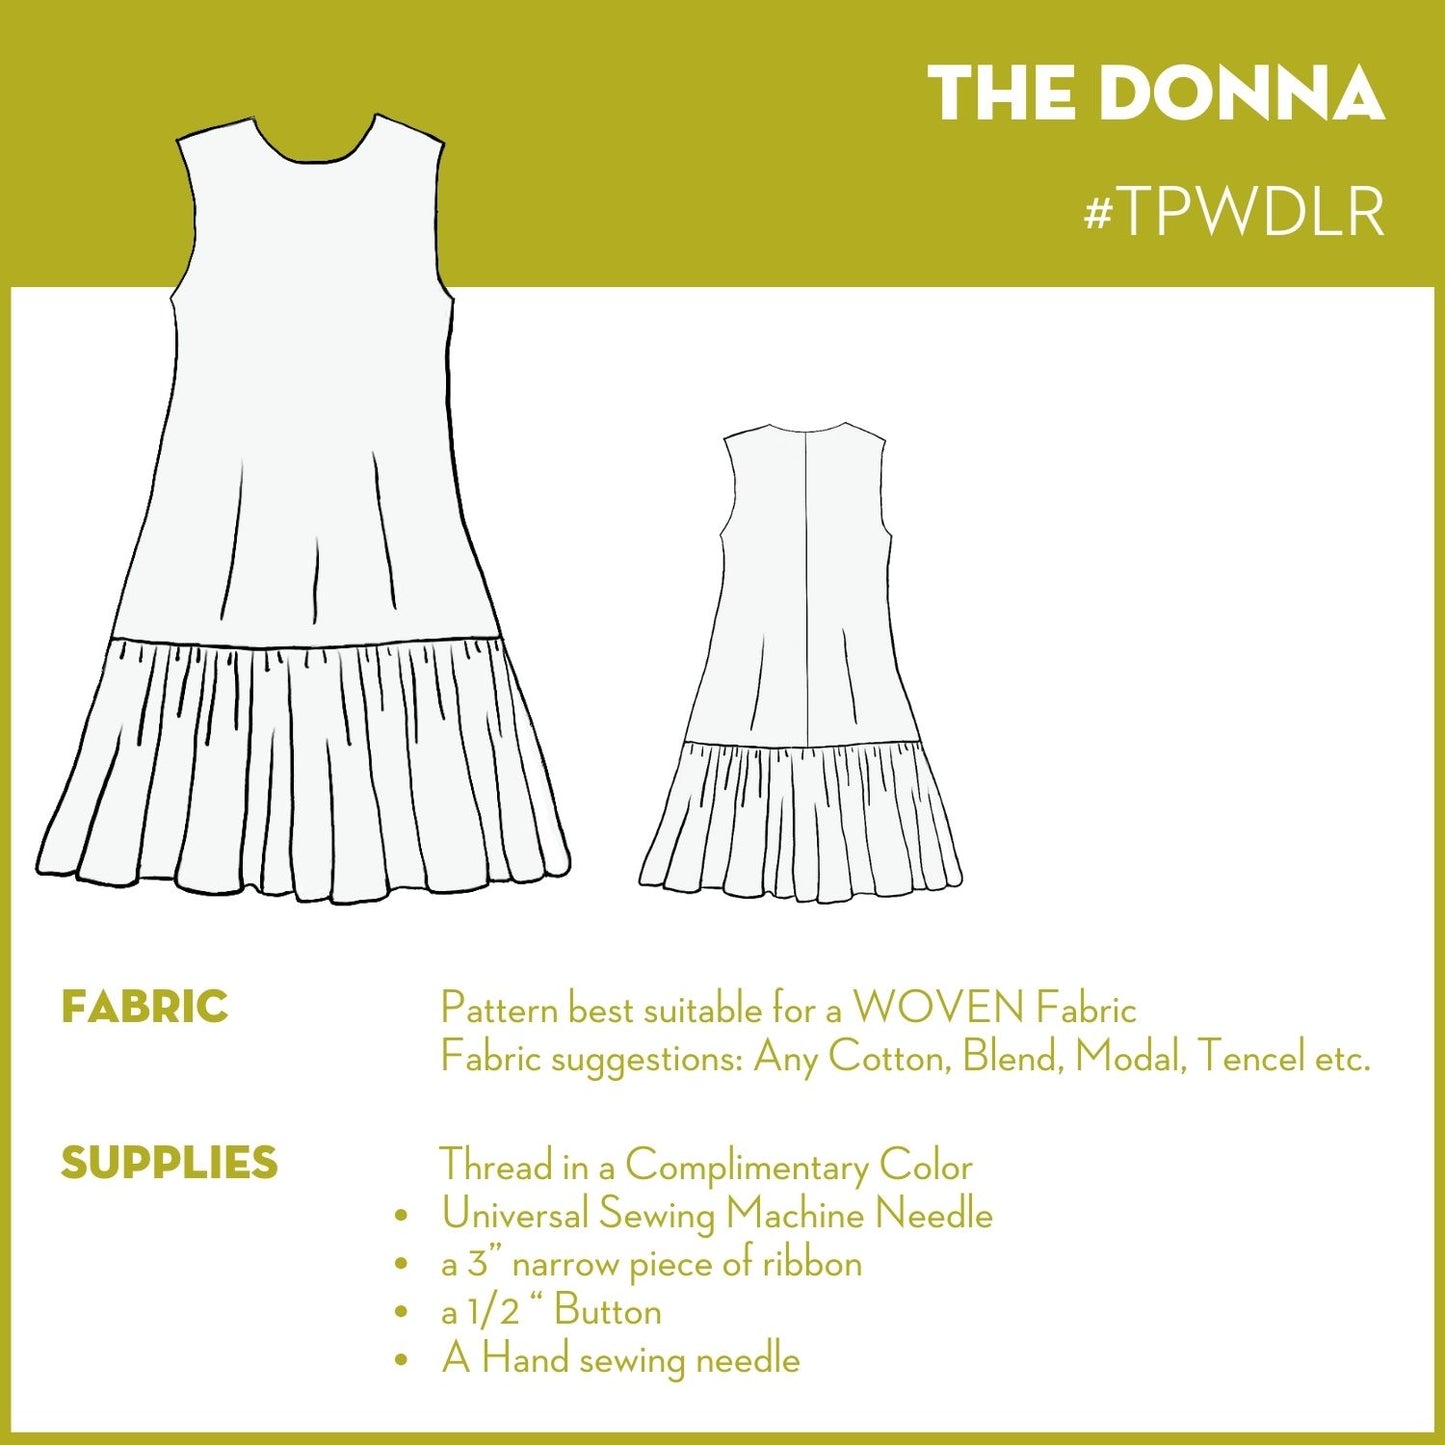 The Donna